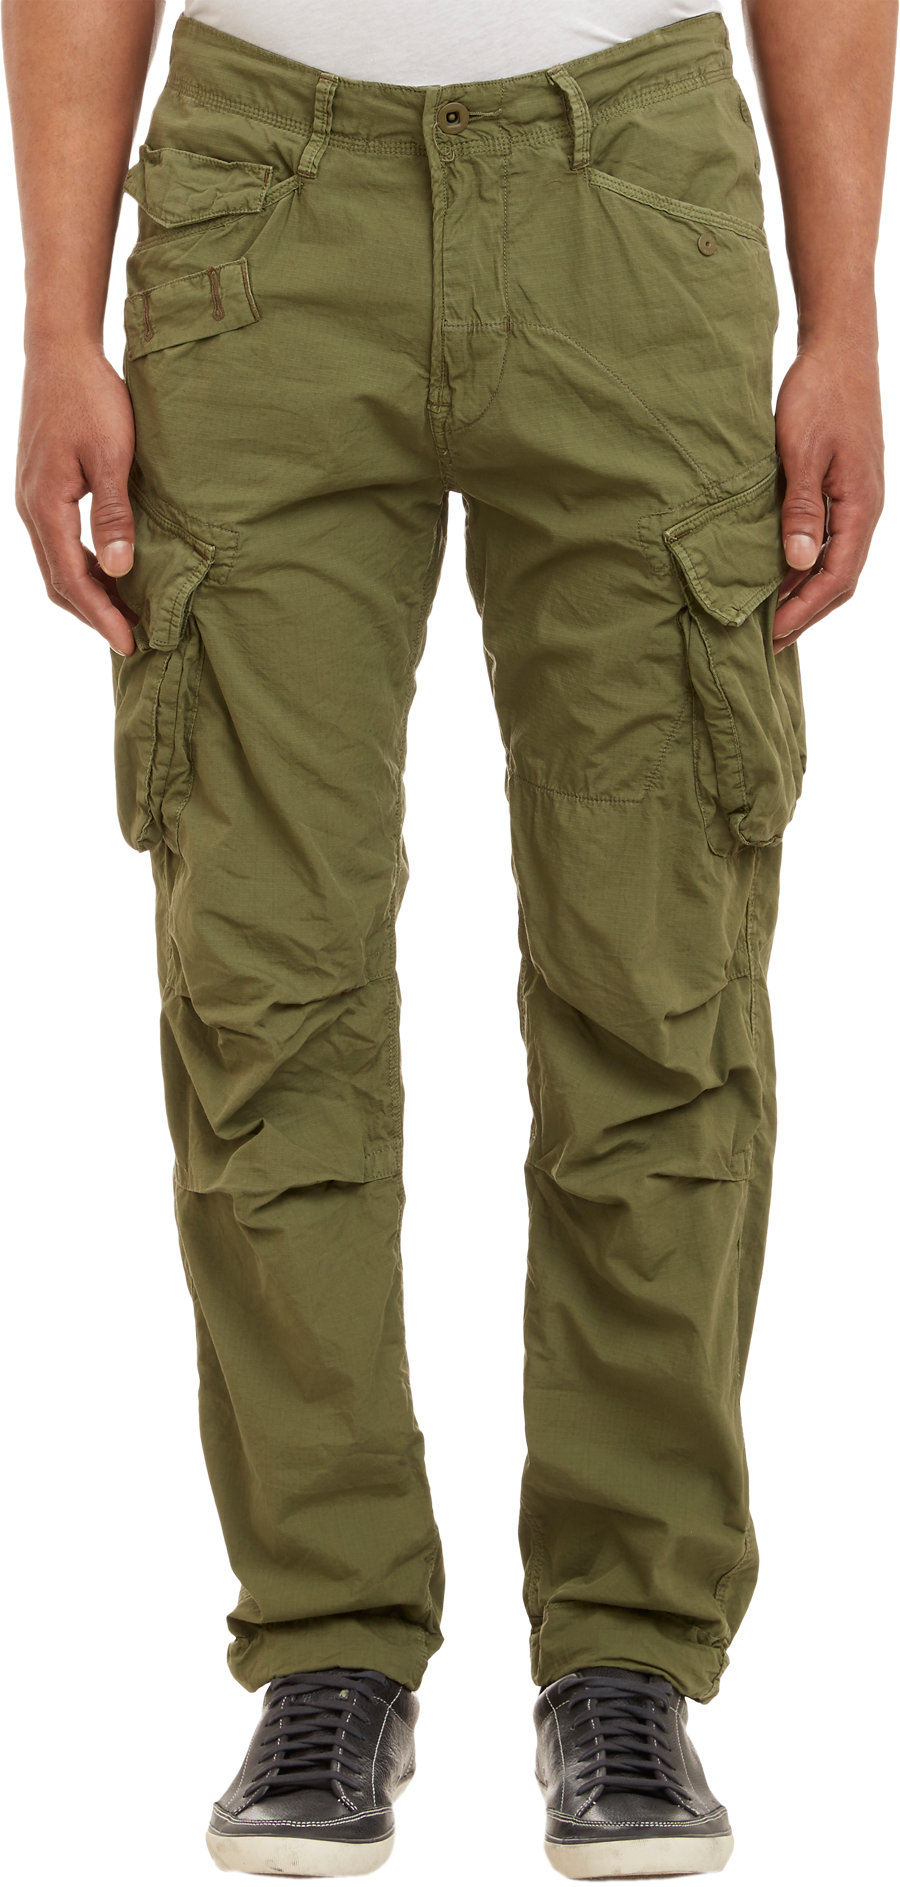 G-Star RAW Rovic Tapered Cargo Pants Olive in Green for Men - Lyst